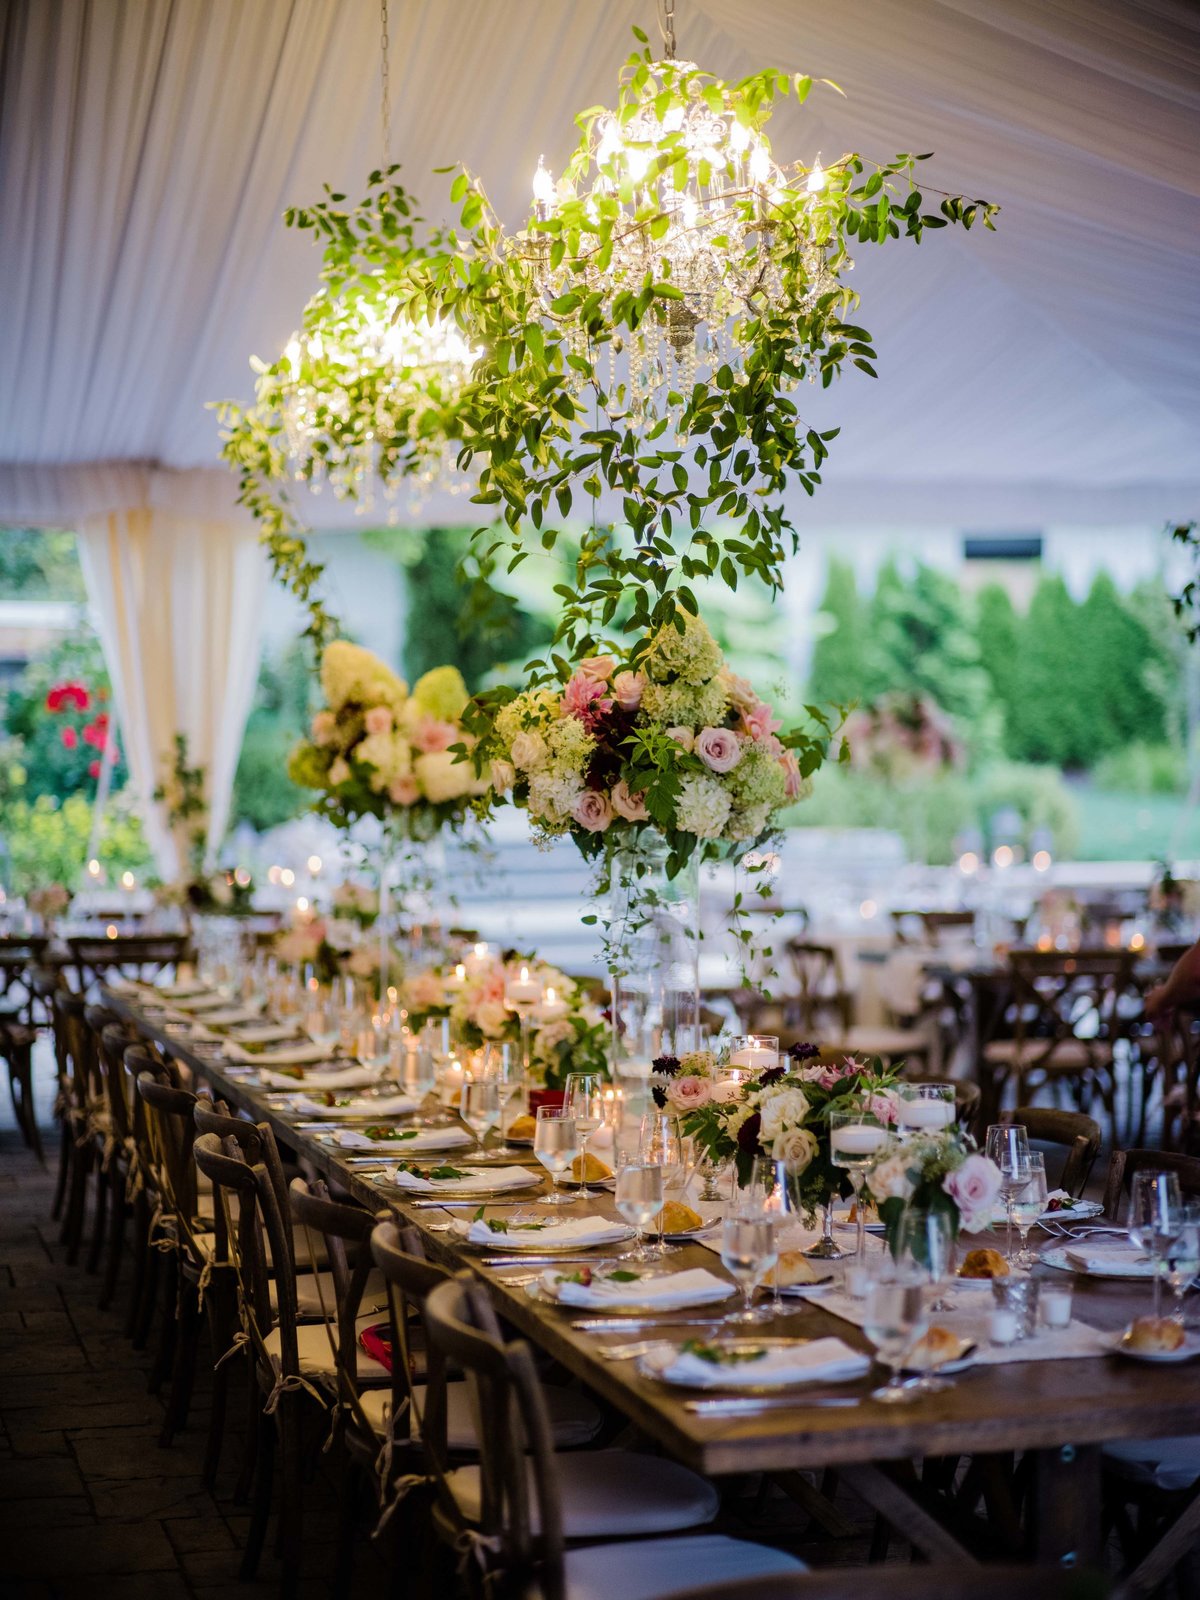 Green smilax covered chandeliers hang from the tent in this romantic garden wedding designed by Flora Nova.